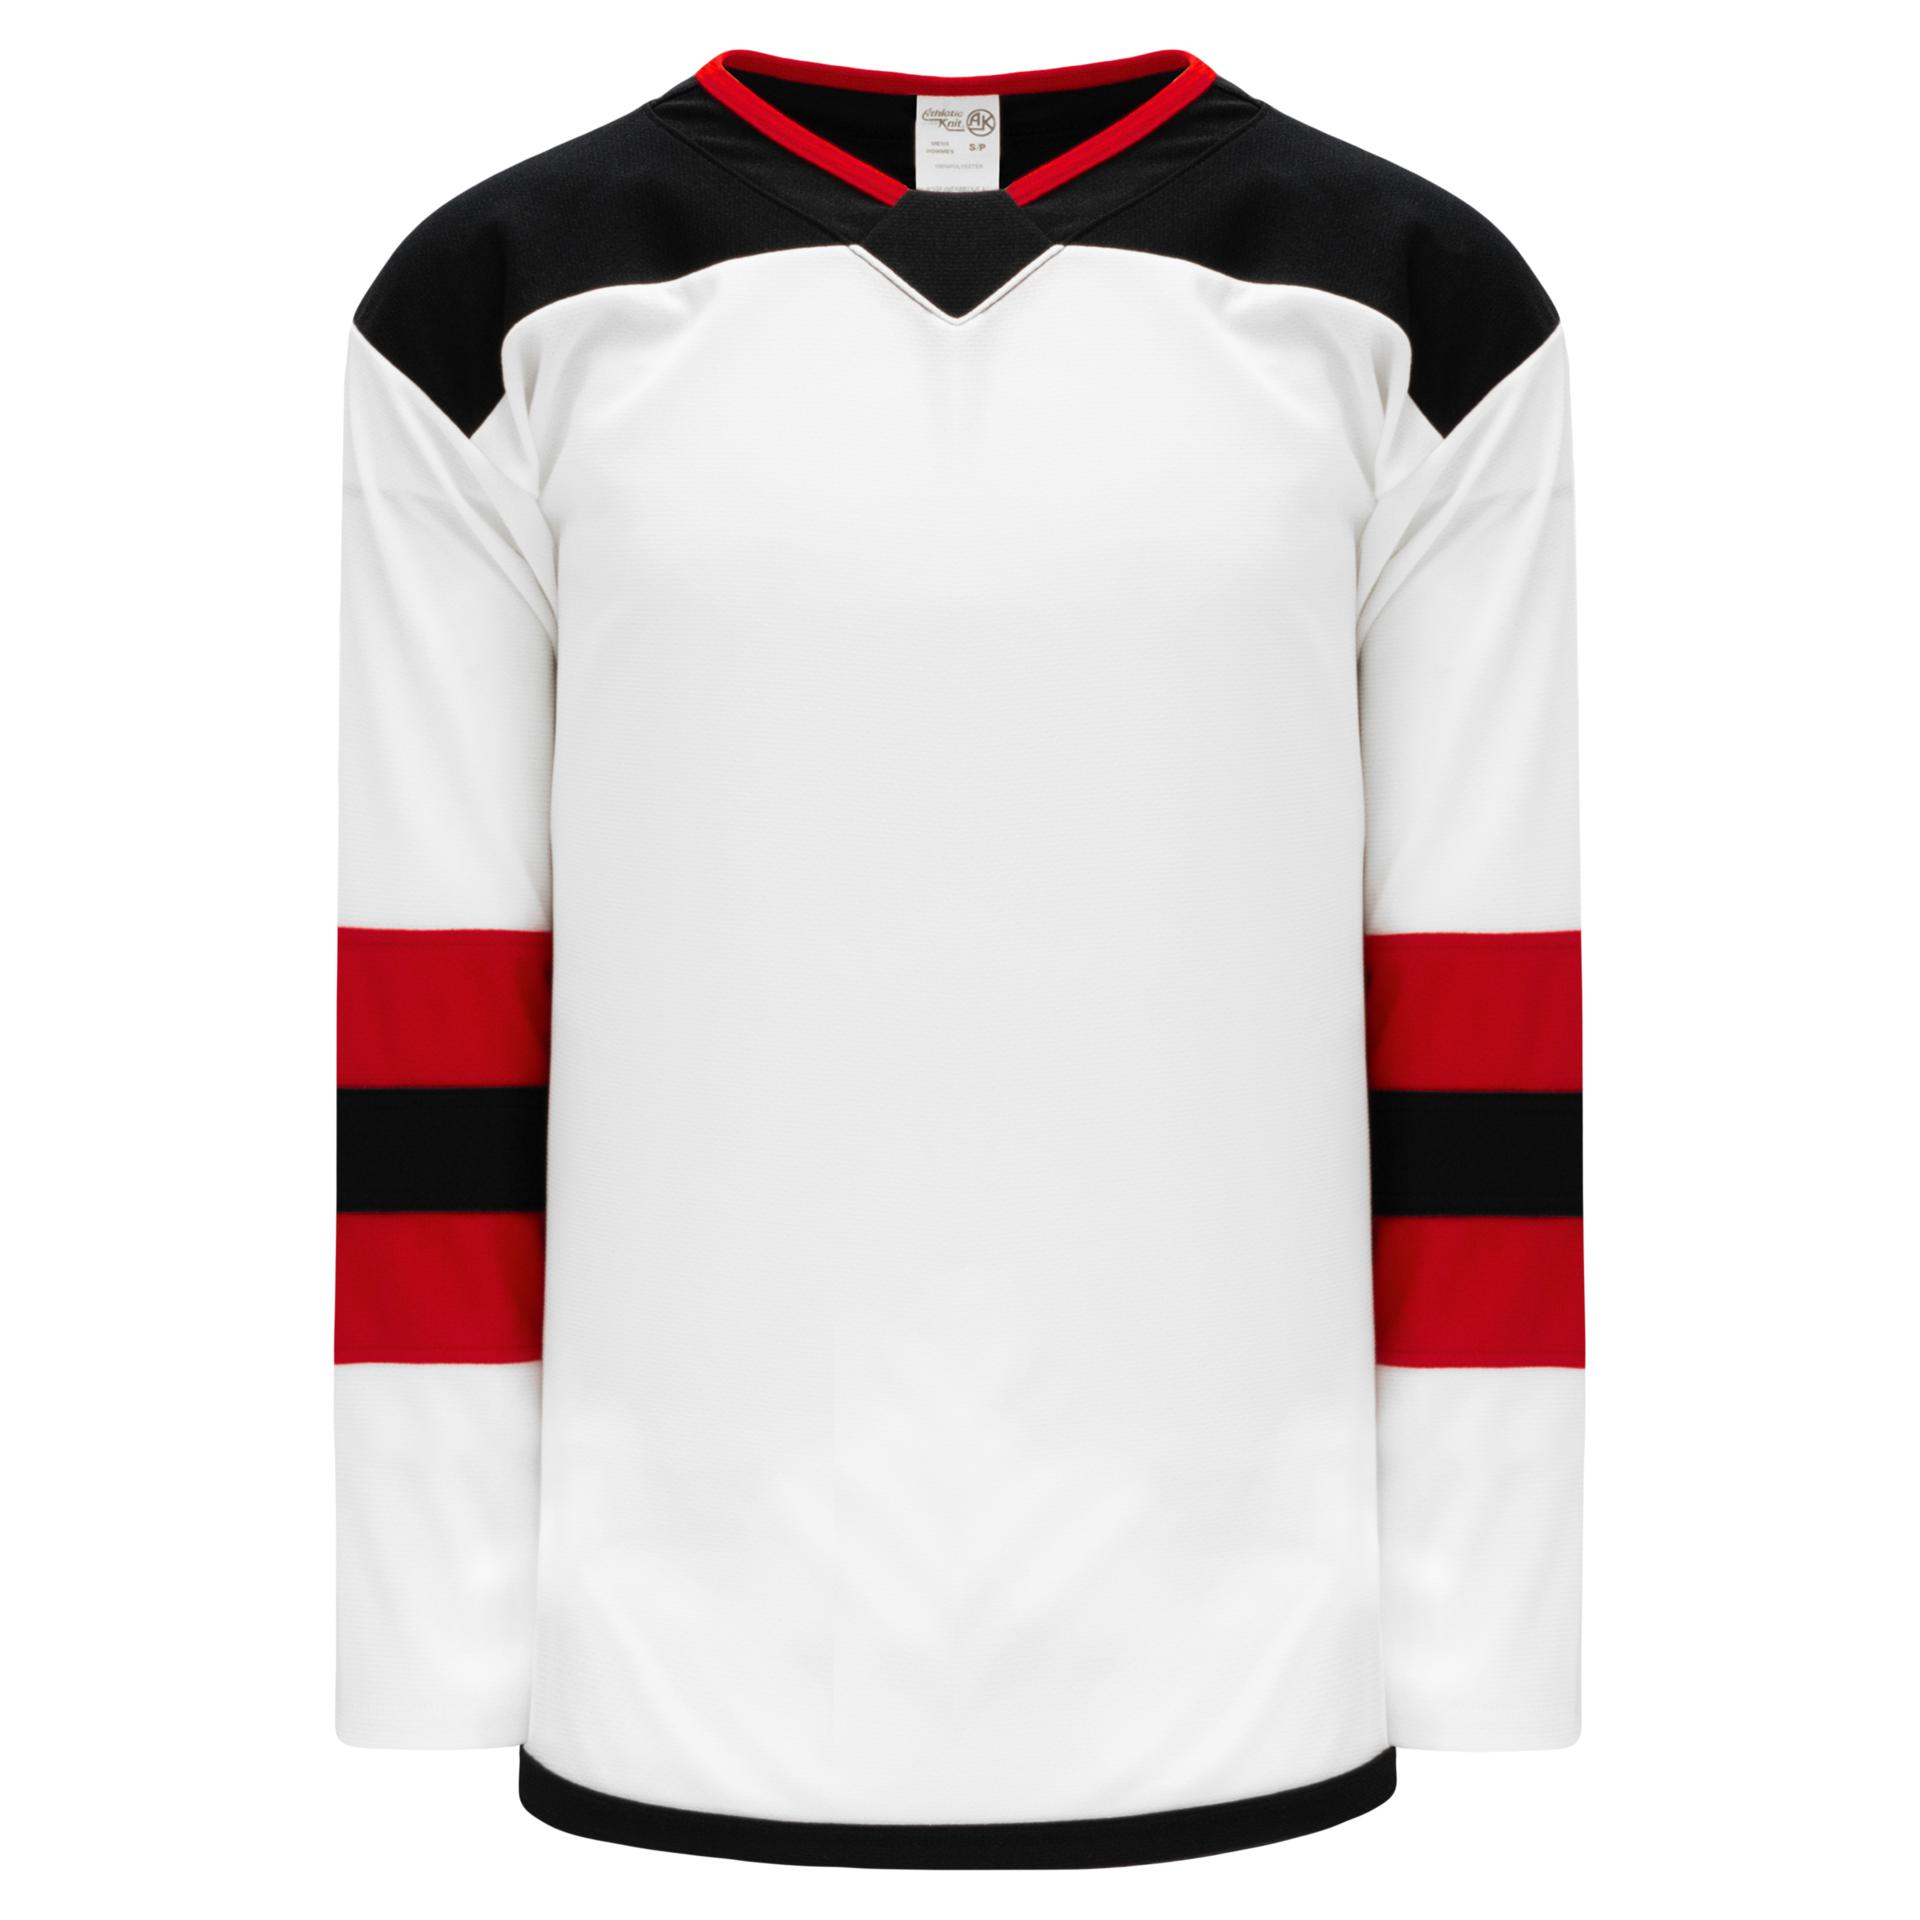 New Jersey Devils – Hockey Authentic